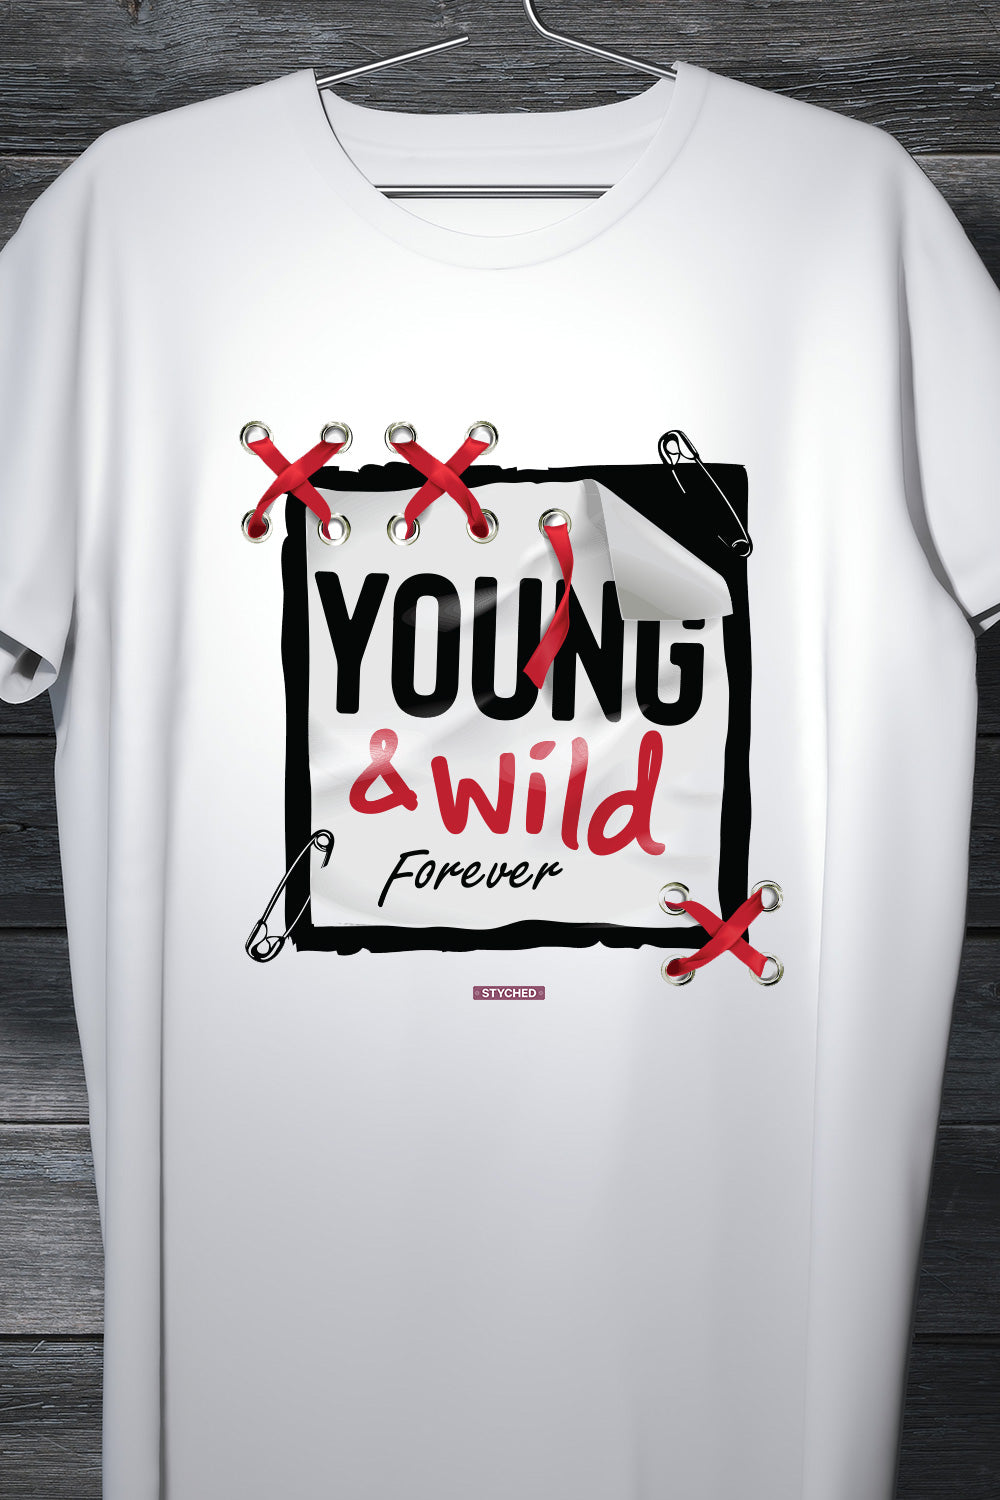 Young and Wild forever - Graphic printed white casual fashion tshirt